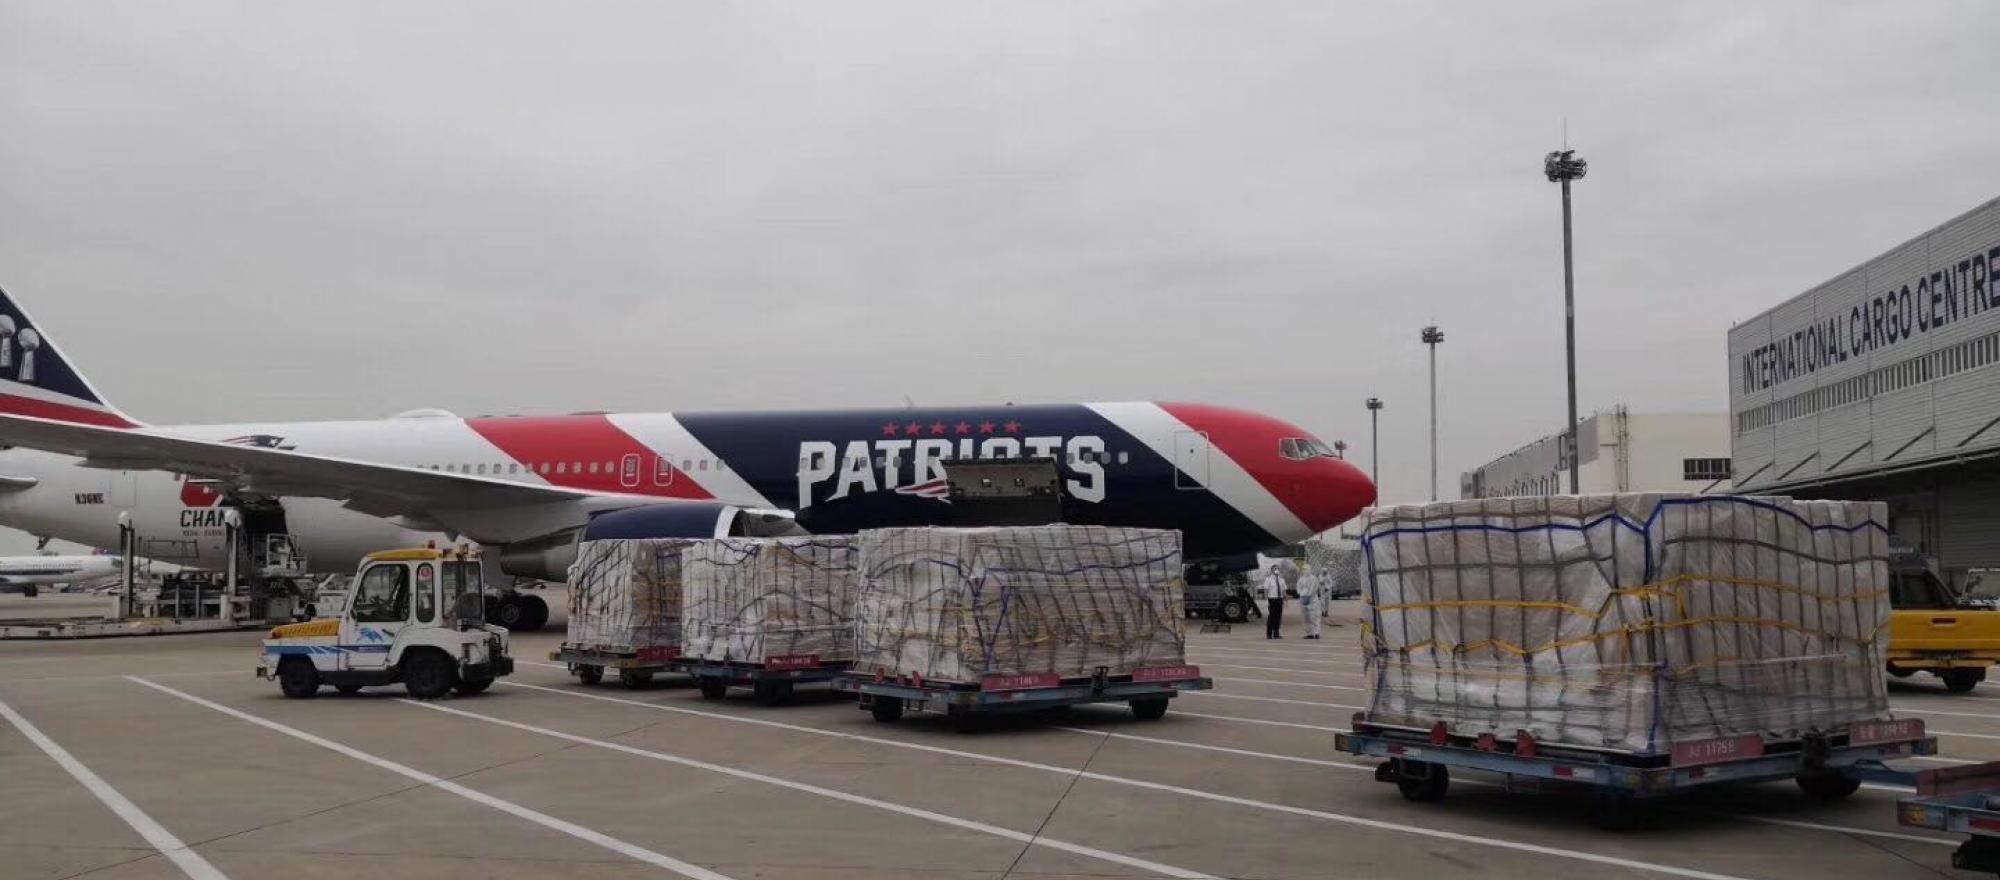 Robert Kraft, owner of the New England Patriots football team, volunteered use of the team's Boeing 767 to transport 1 million masks at the request of Massachusetts Governor Charlie Baker. (Photo: Universal Weather & Aviation)